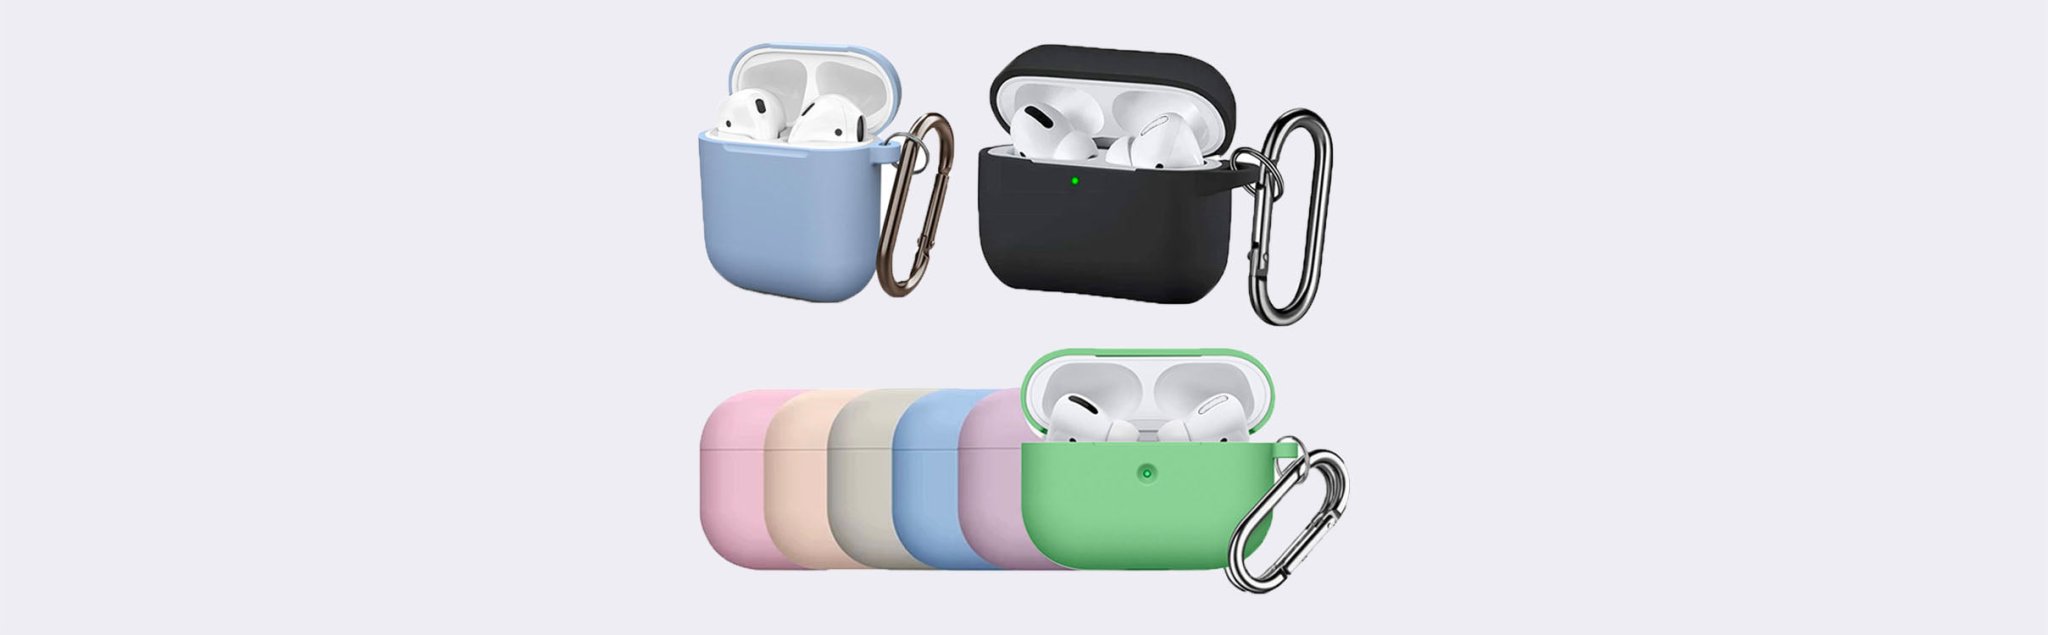 AirPods - Accessories Gifts UK